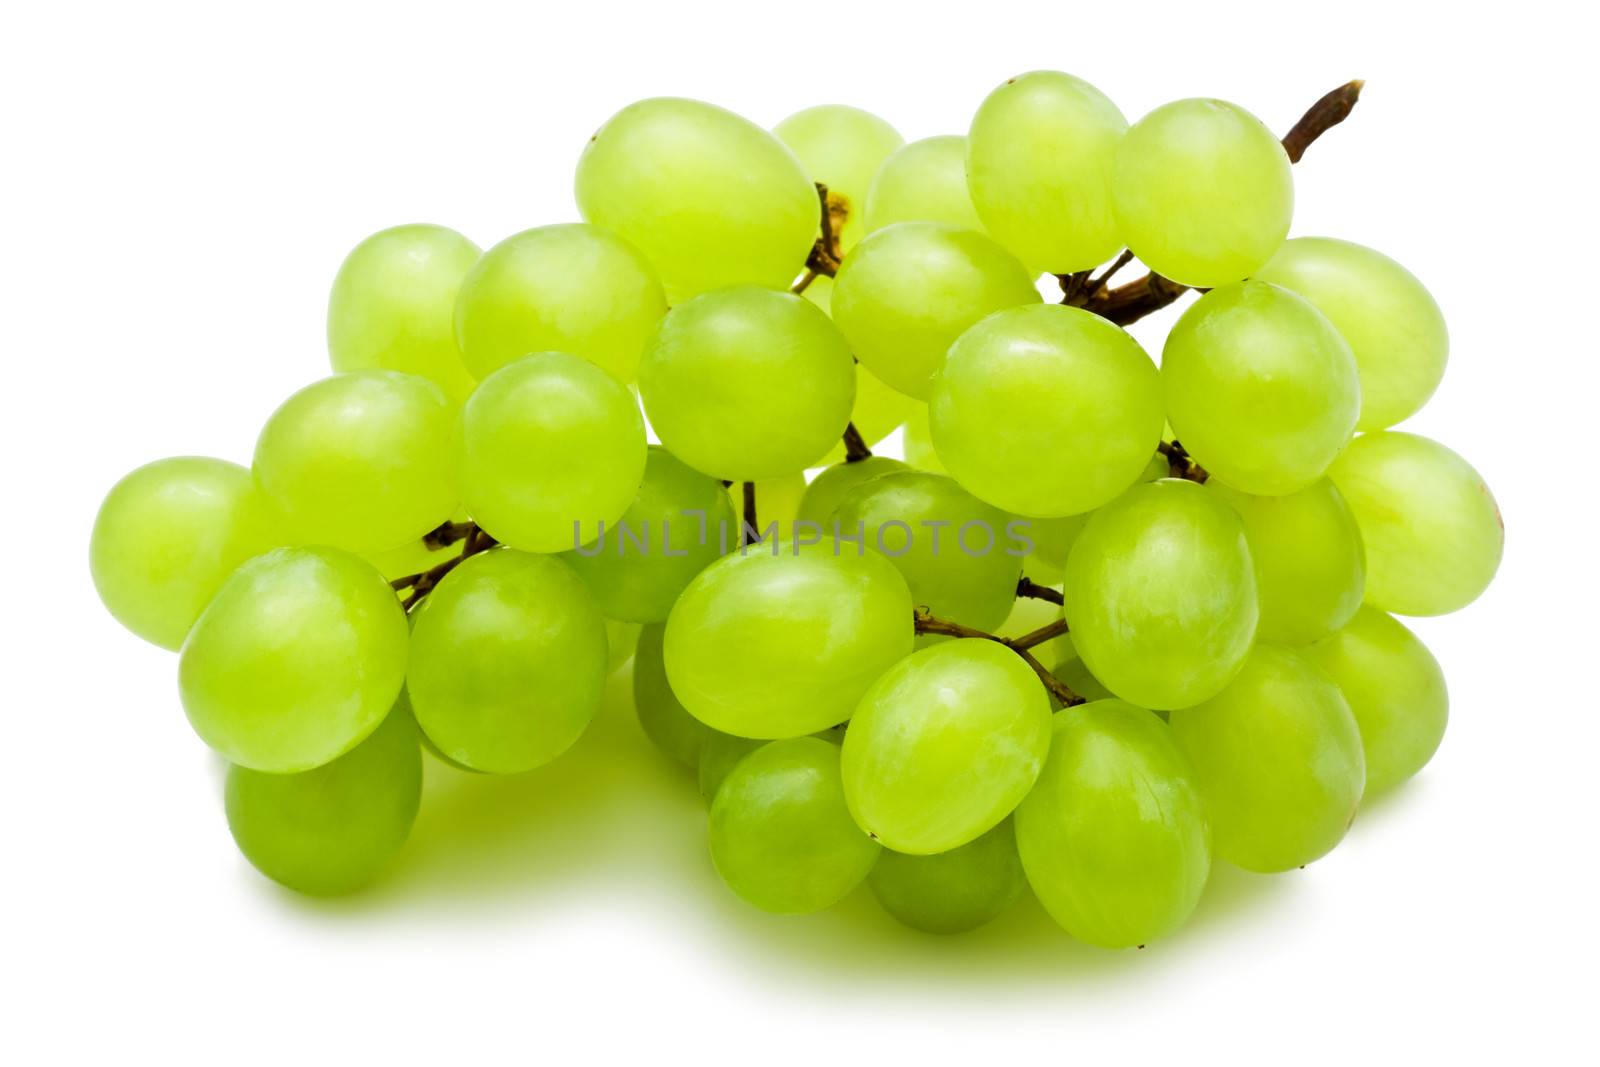 Branch of grapes isolated on white background